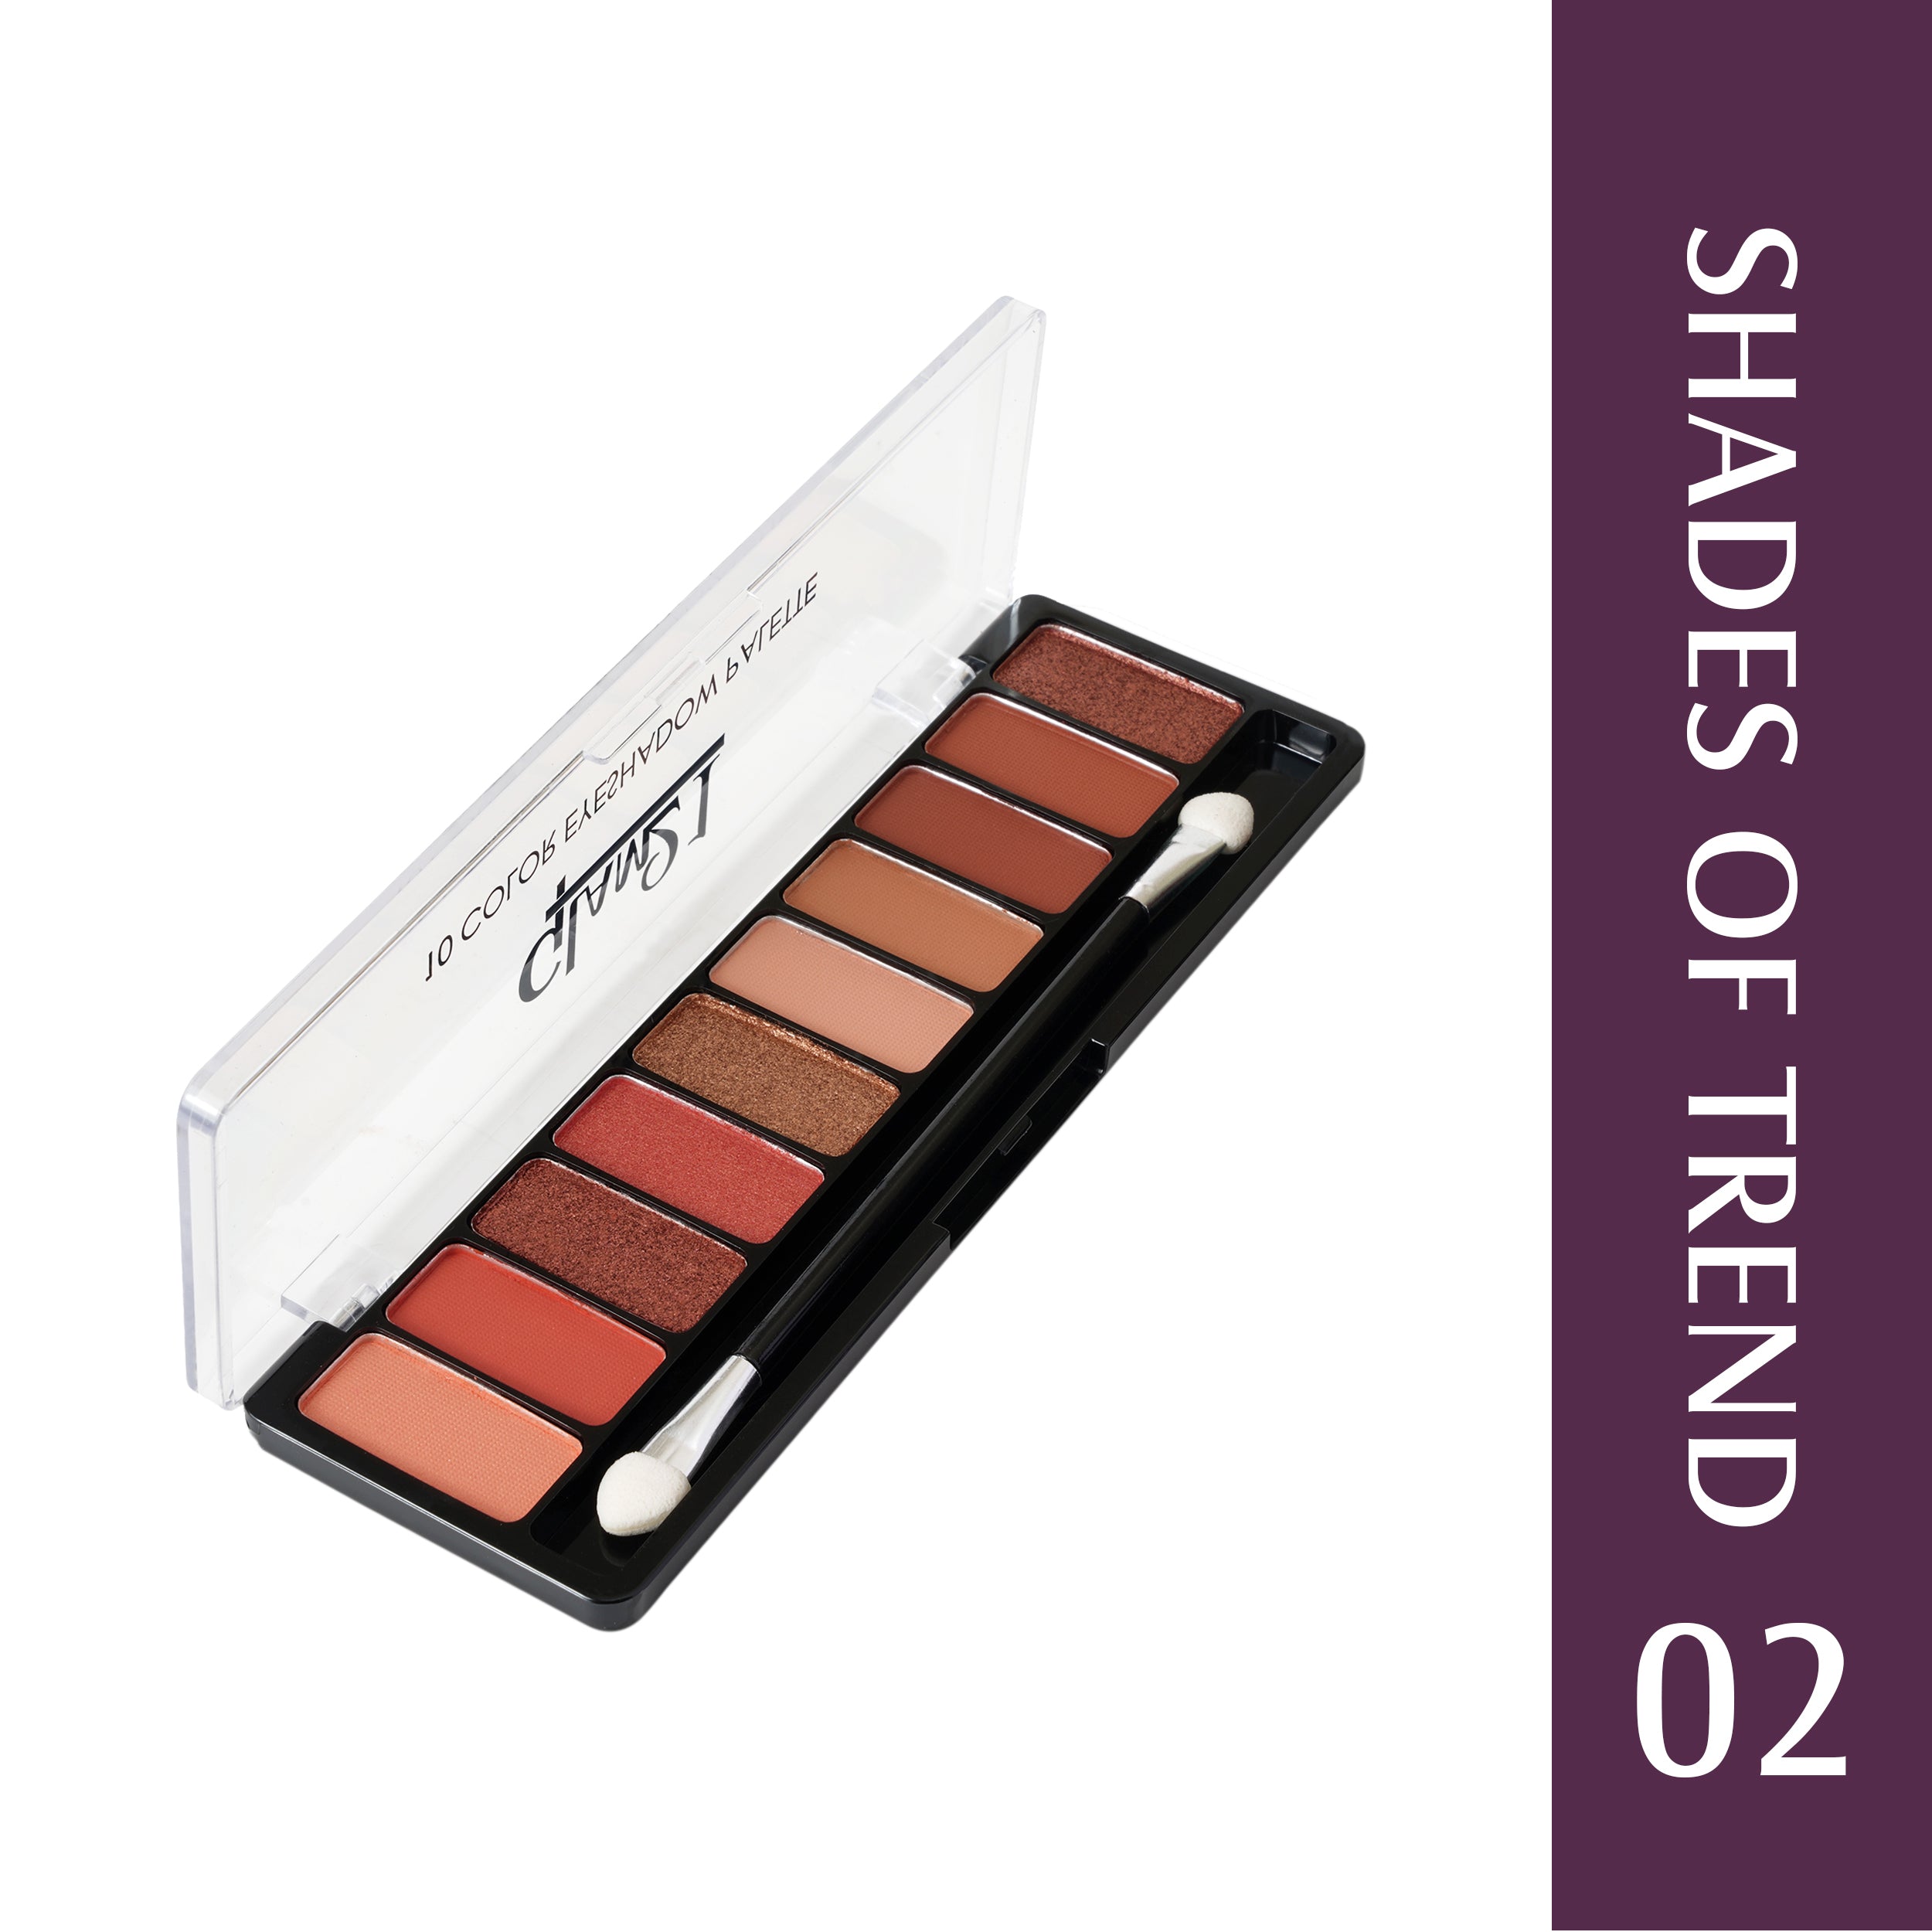 Glam21 10 Color Eyeshadow Palette - Soft Matte & Creamy Shimmer in Just One Swipe 8.8 g (Shade-02)